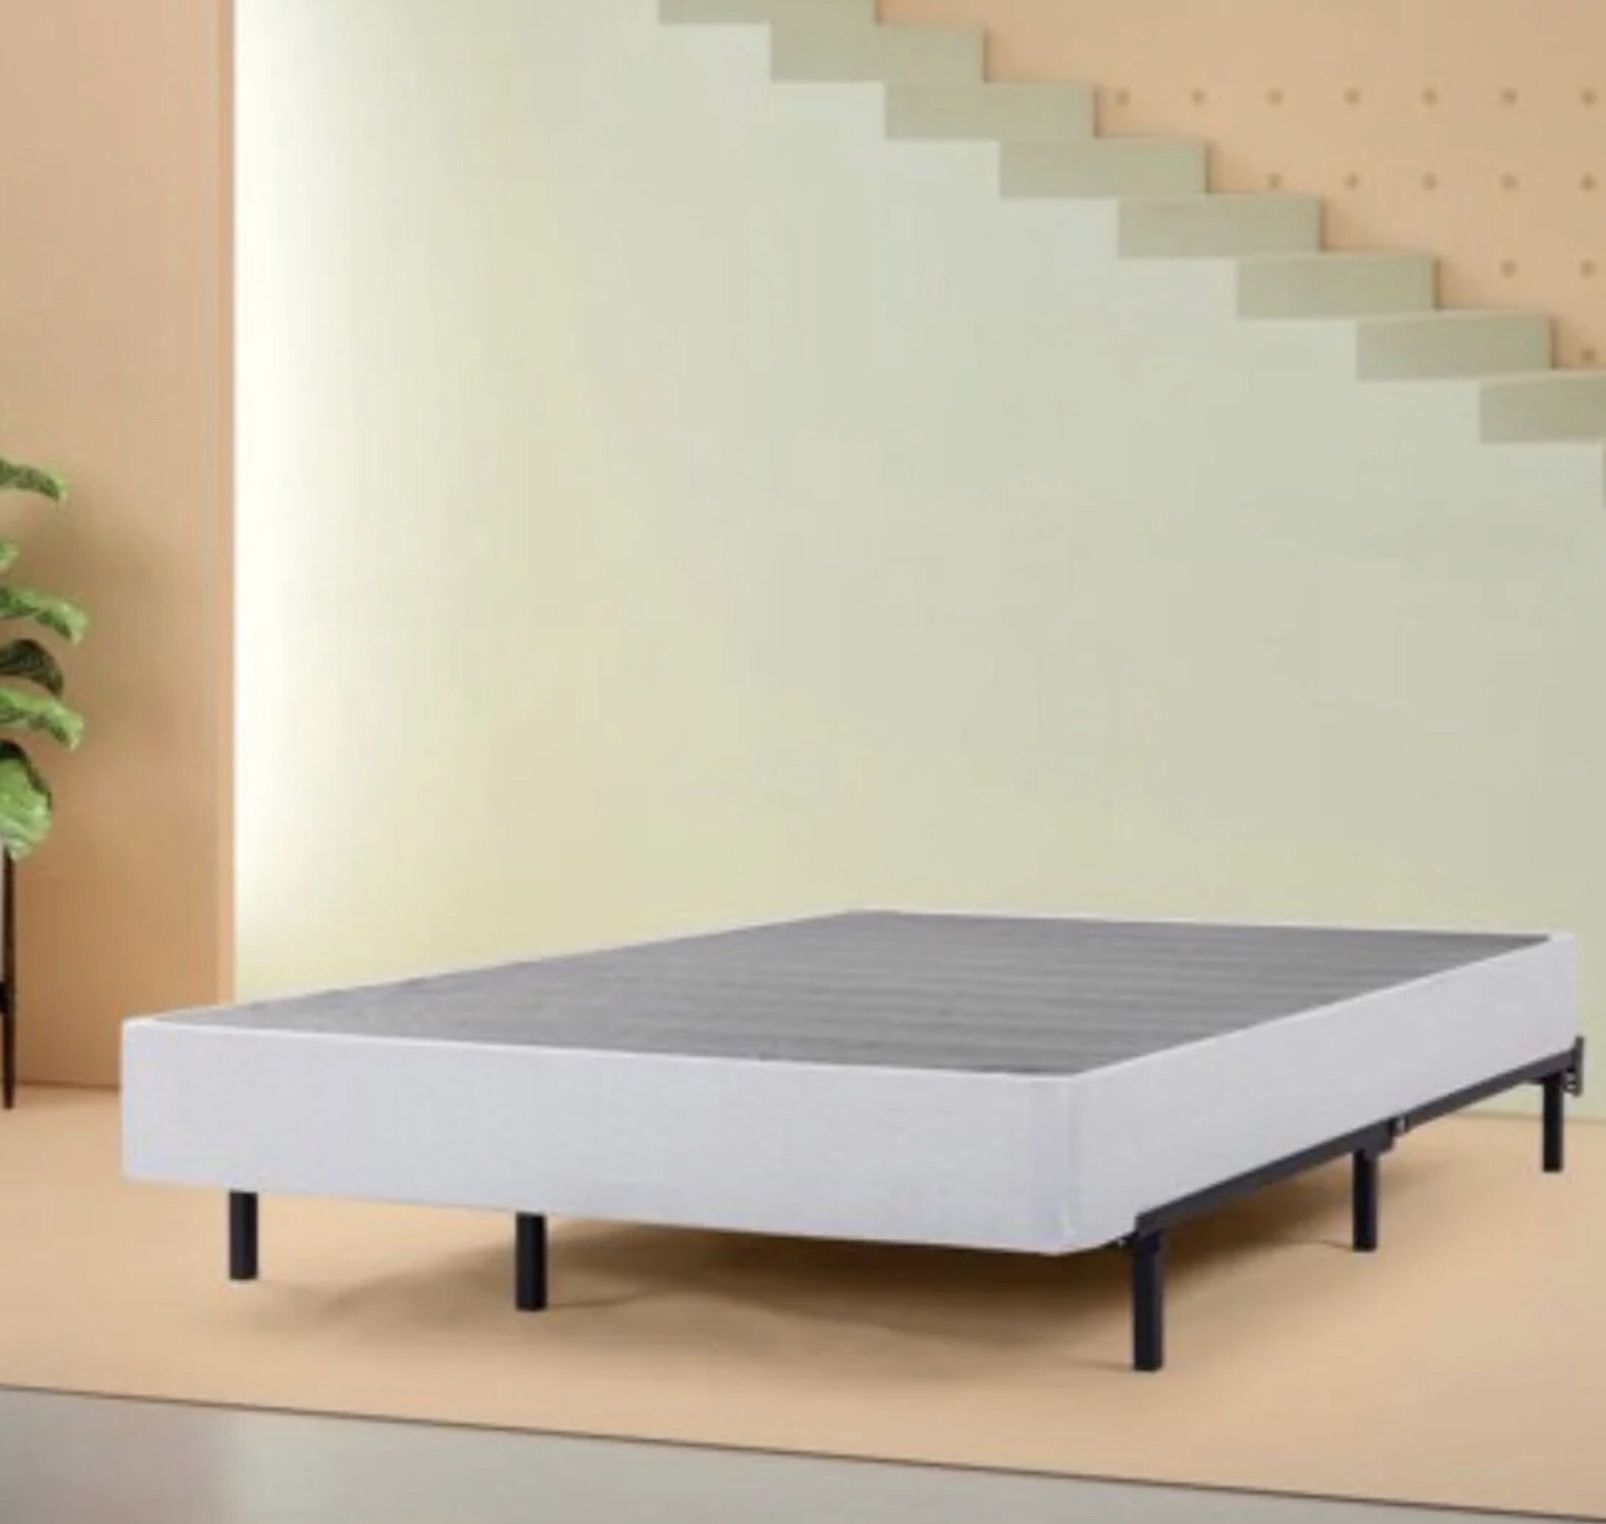 Brand New Spa Sensations by Zinus 9" Standing Metal Smart Box Spring, King Brand New in box